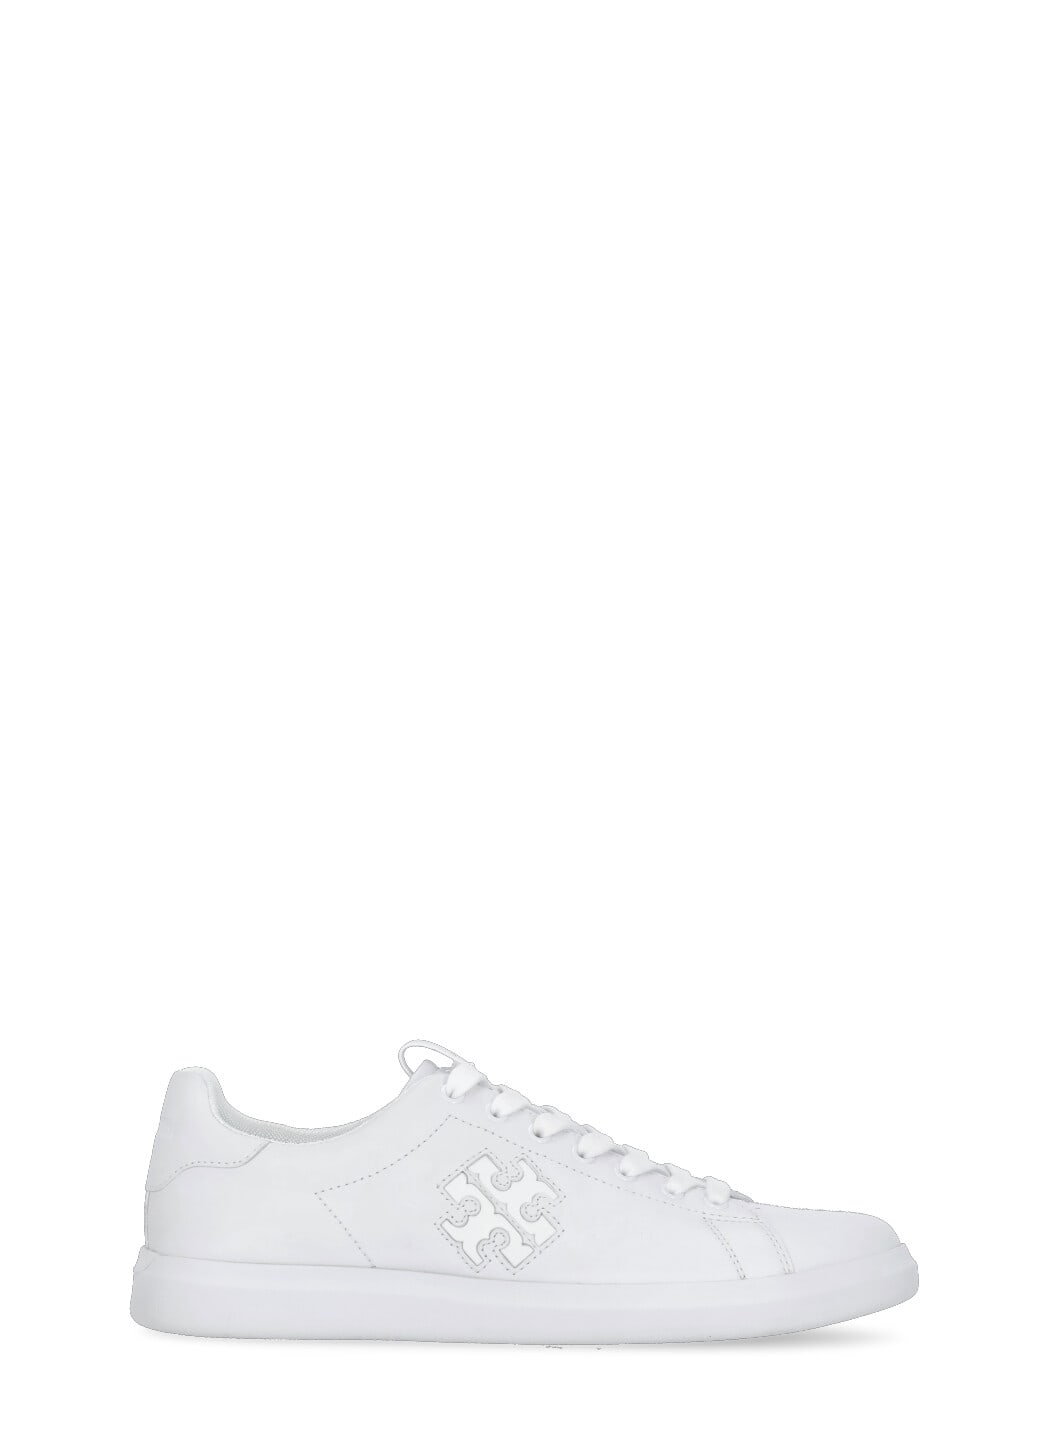 TORY BURCH LEATHER SNEAKERS